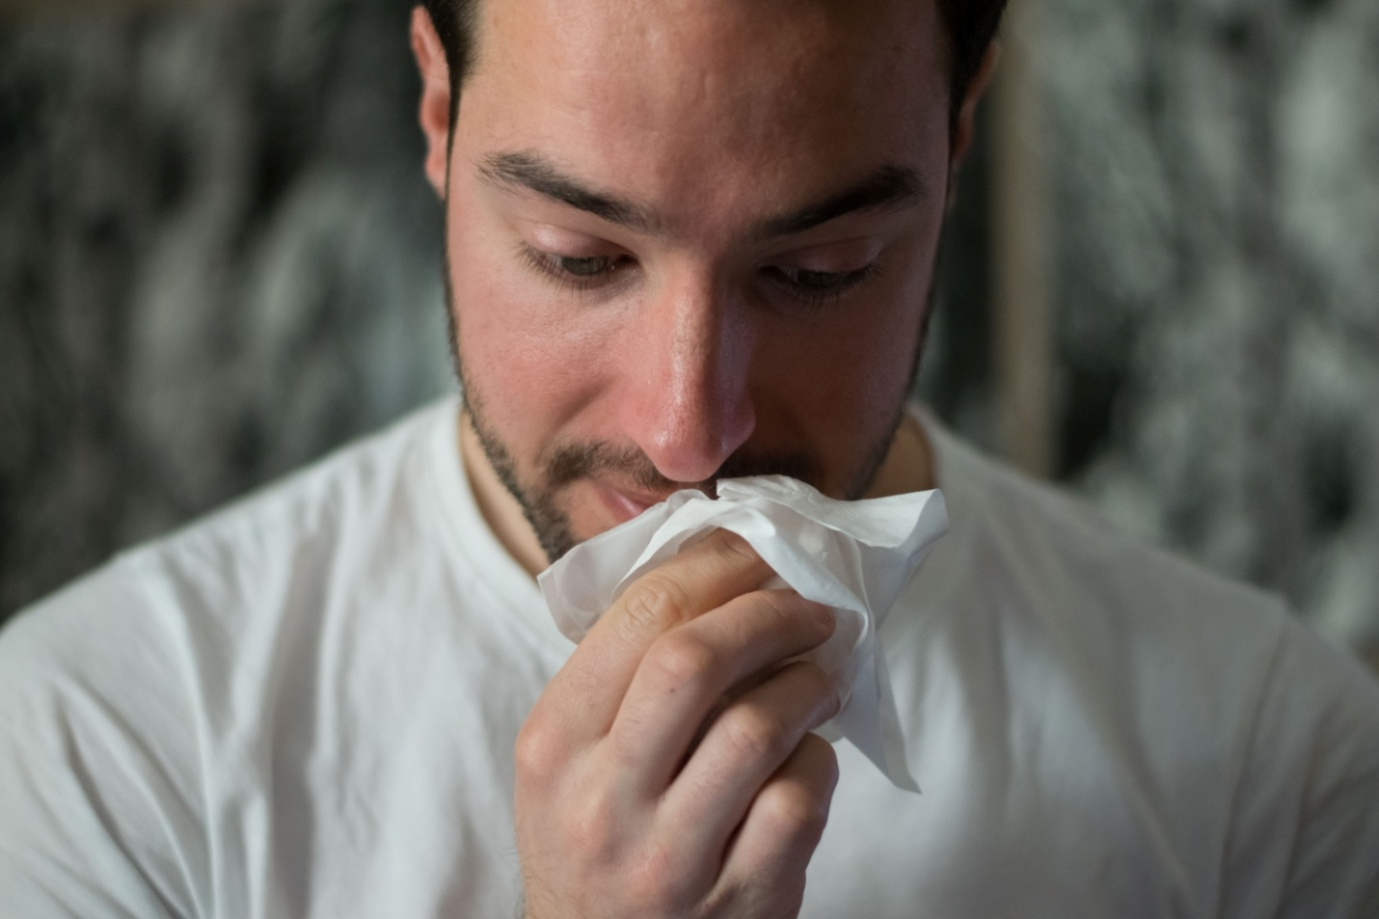 A man having a coldis holding a tissue close to his nose